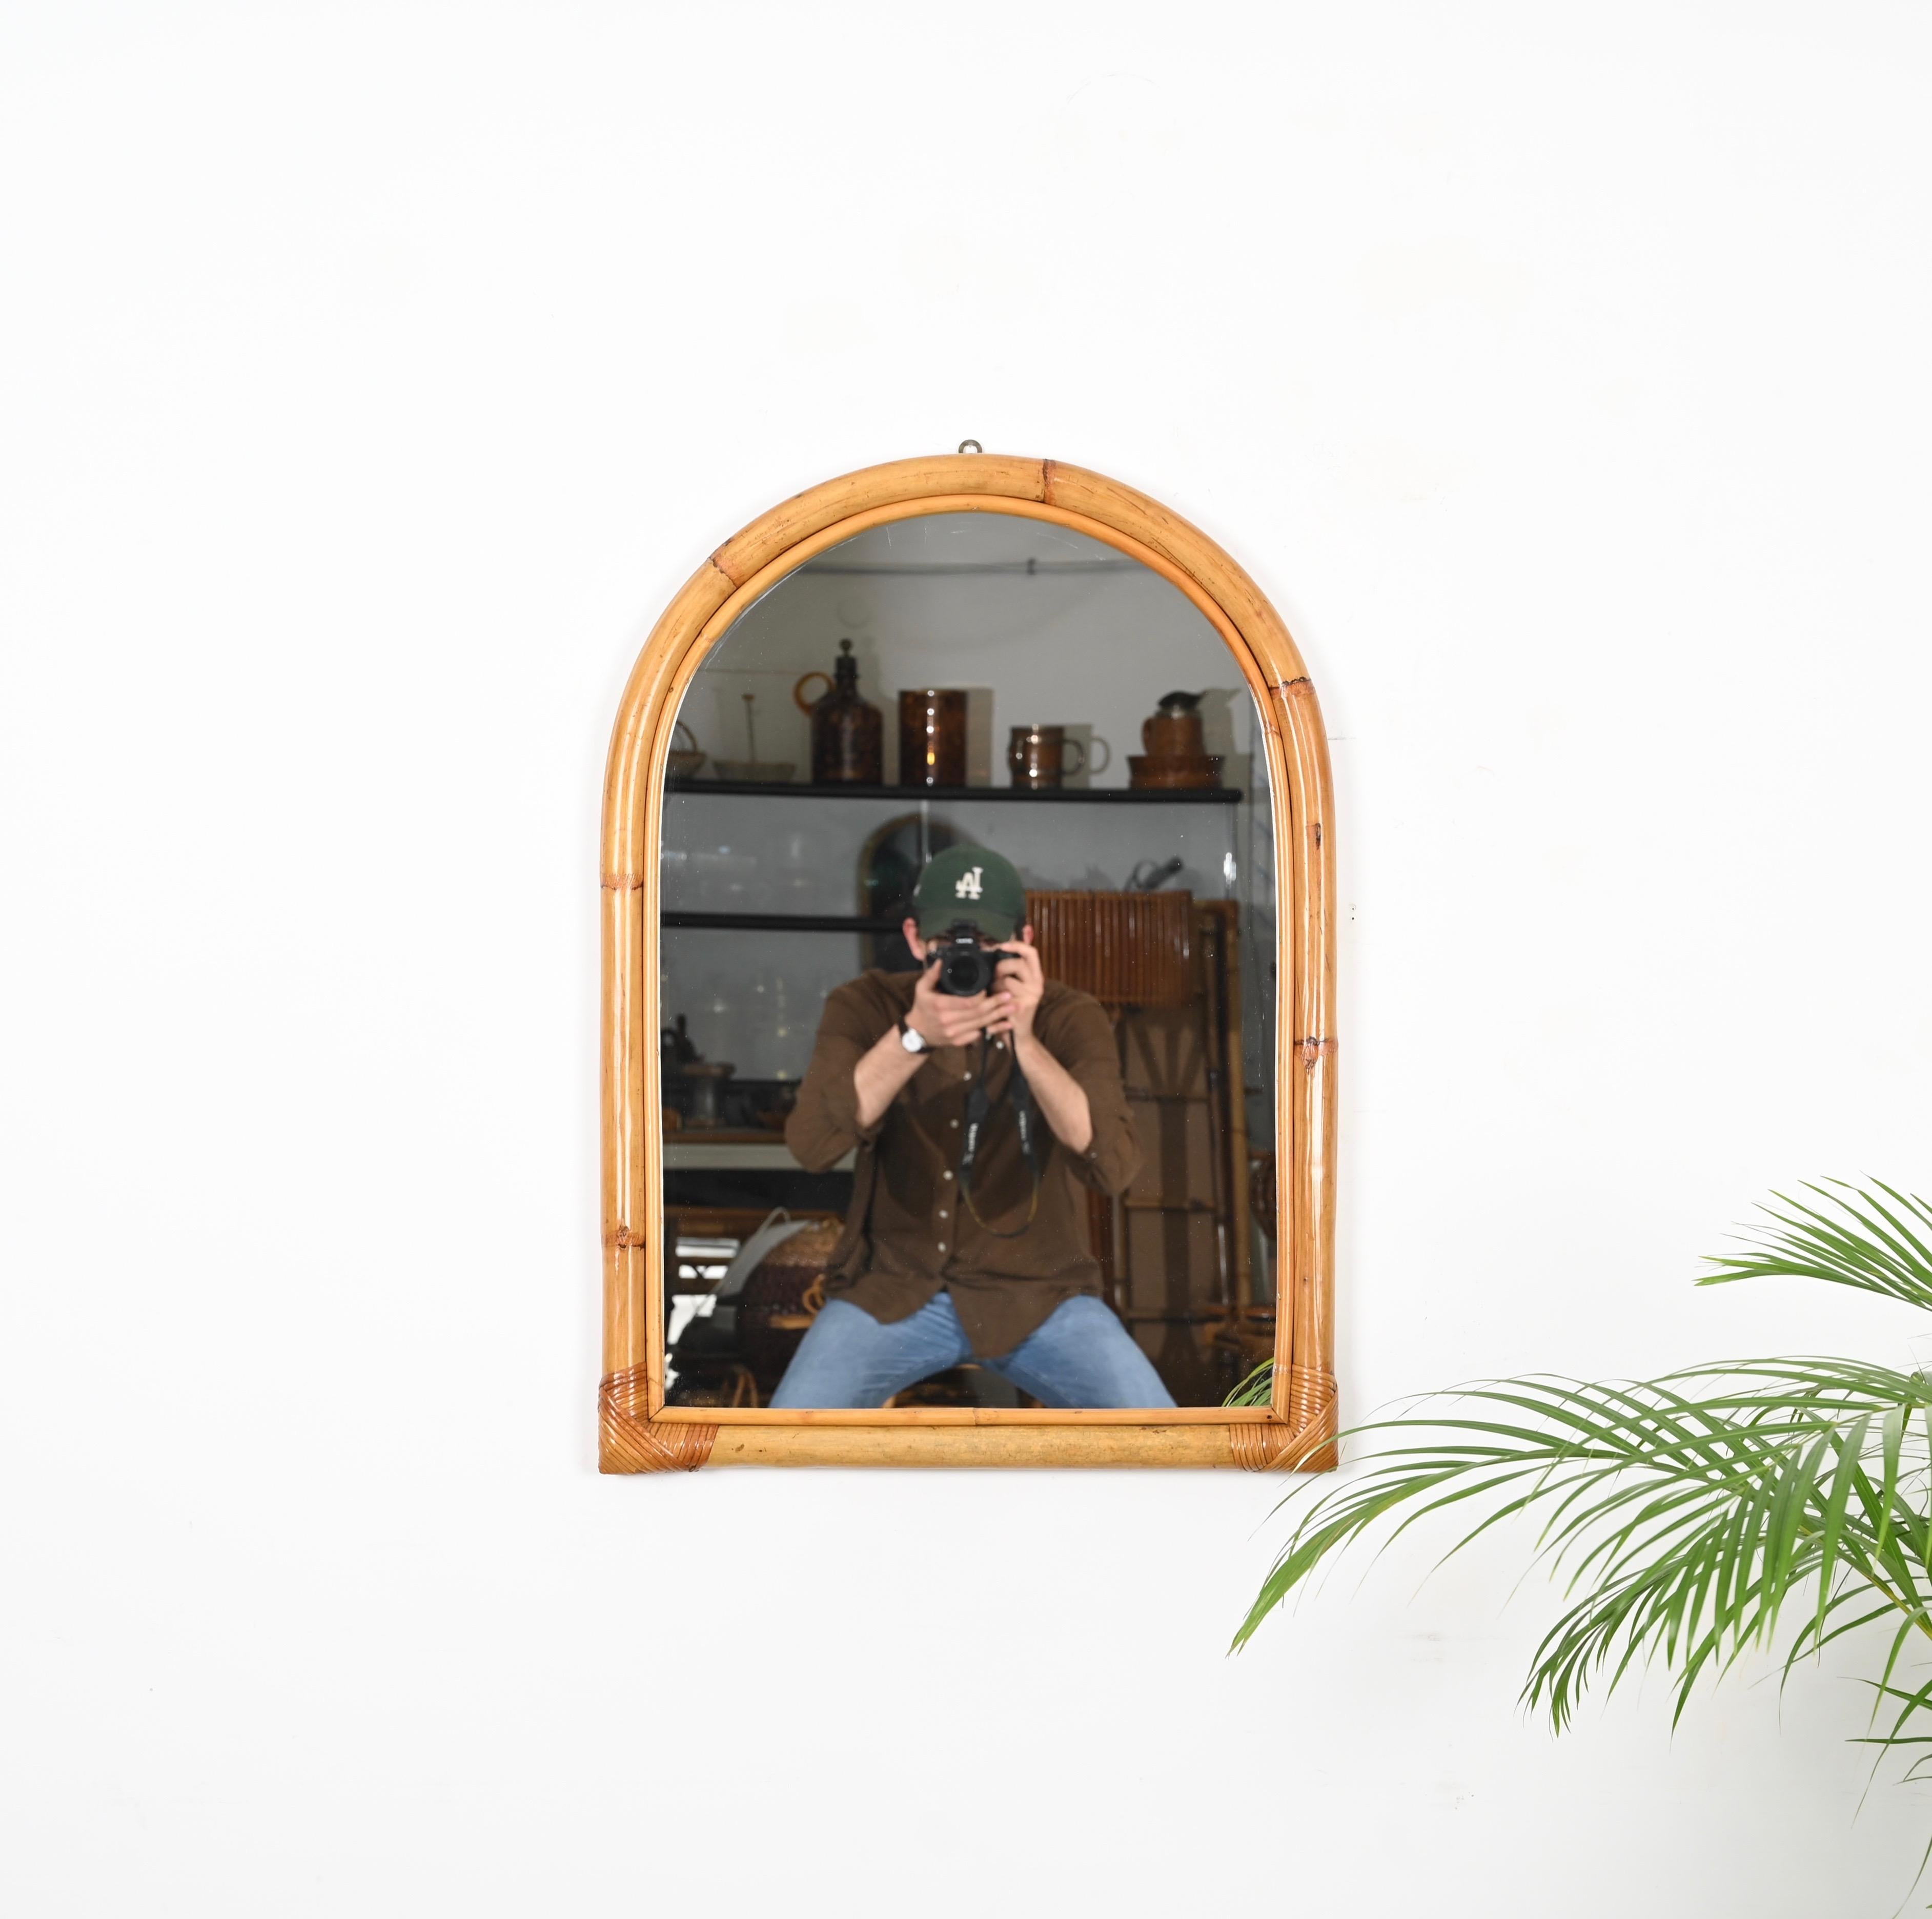 Gorgeous Mid-Century arched mirror with double bamboo cane frame. This lovely item was produced in Italy in the 1970s.

The way the two-round bamboo canes curve together creating a perfect arch and integrate the glass mirror is superb and conveys